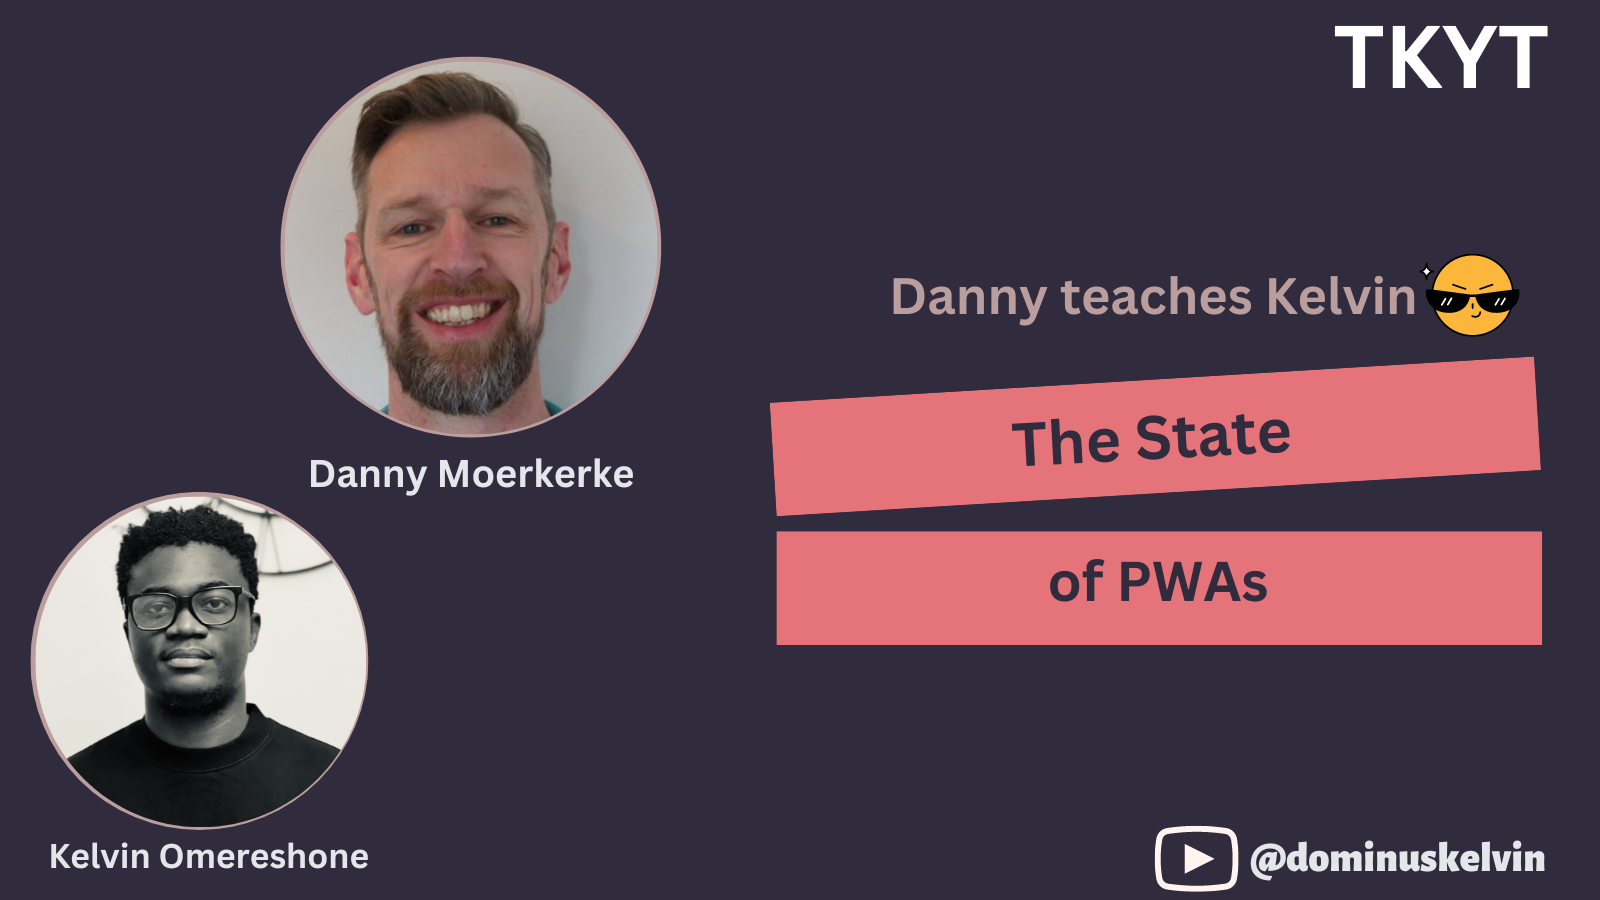 The State of PWAs